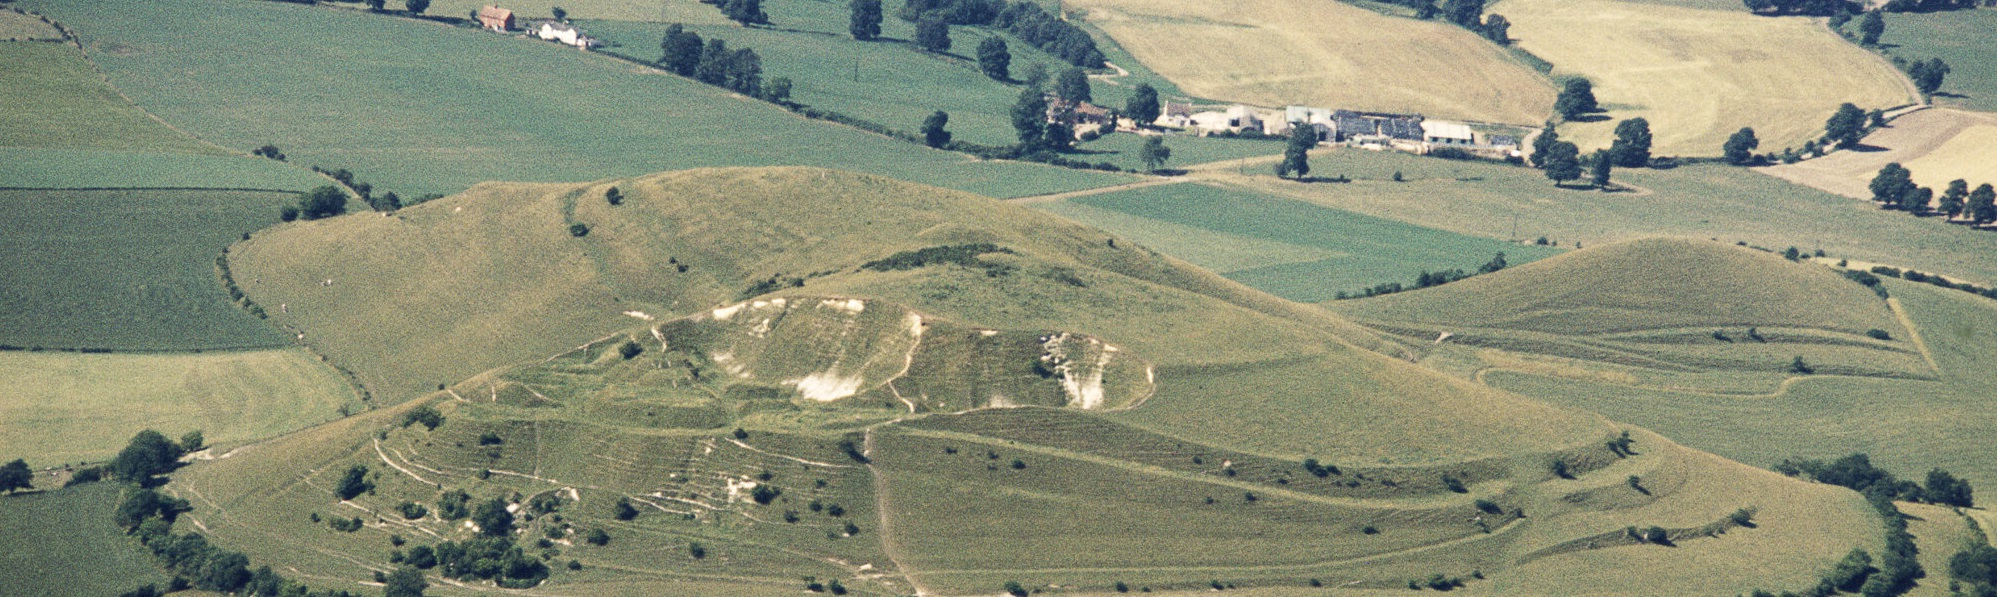 Ariel photo of Cley Hill, Wiltshire